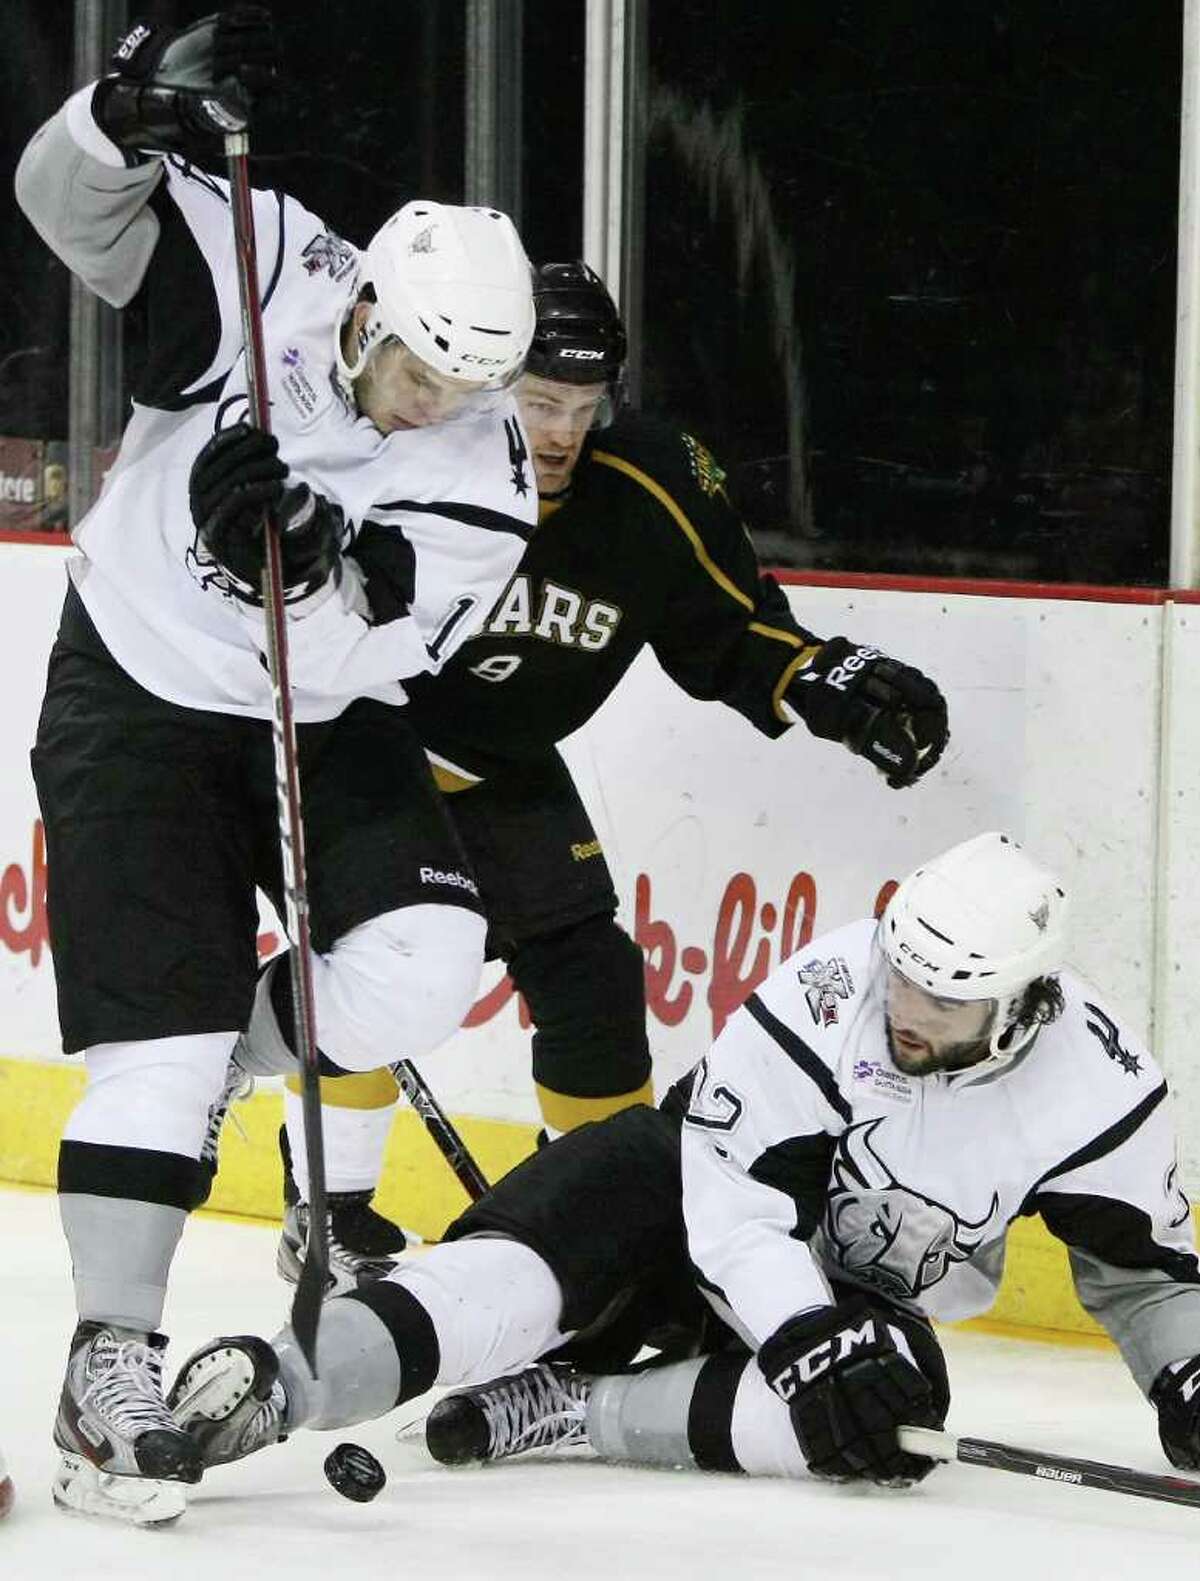 The Rampage's Scott Timmins (lower right) kicks the puck to Evgenii Dadonov (left) as Texas' Jordie Benn closes in.